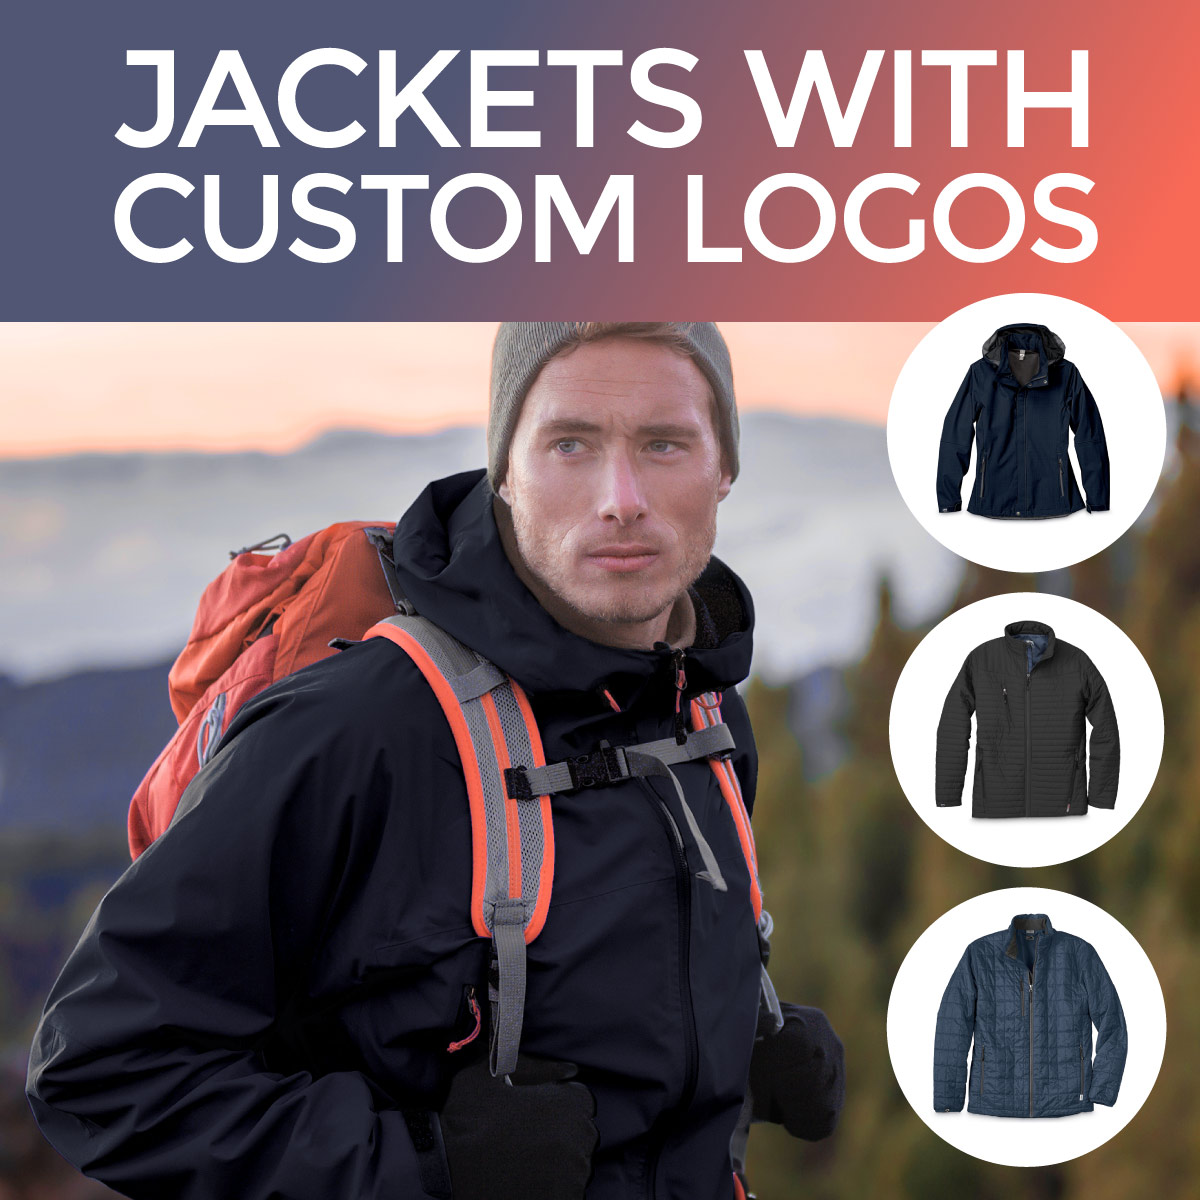 Hiker man wearing a custom logo jacket with mountains in the background